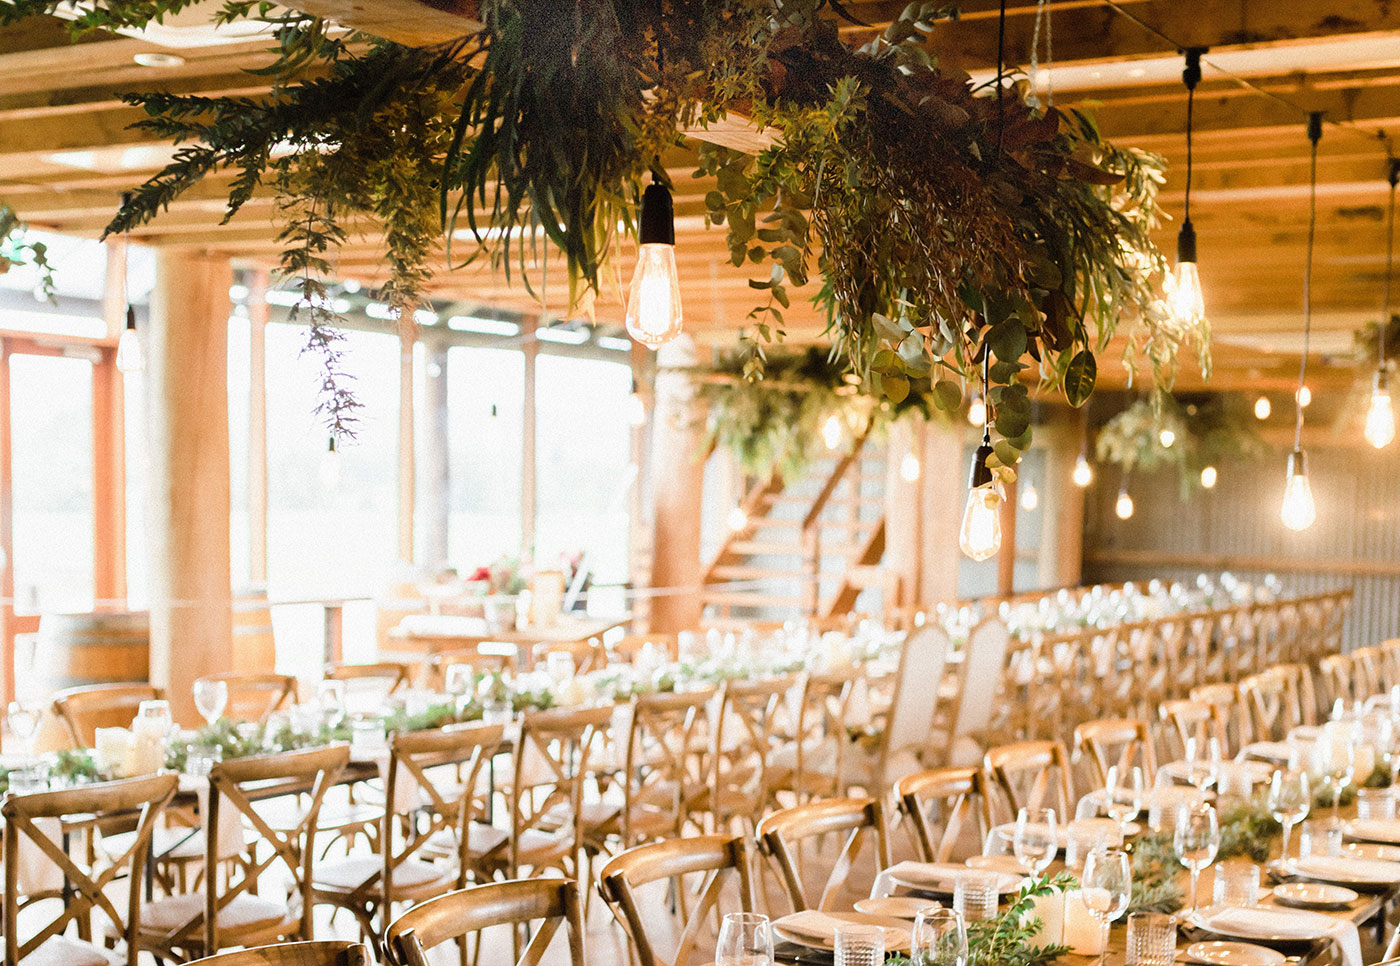 Stunning Ideas to Decorate the Ceiling of your Wedding Venue